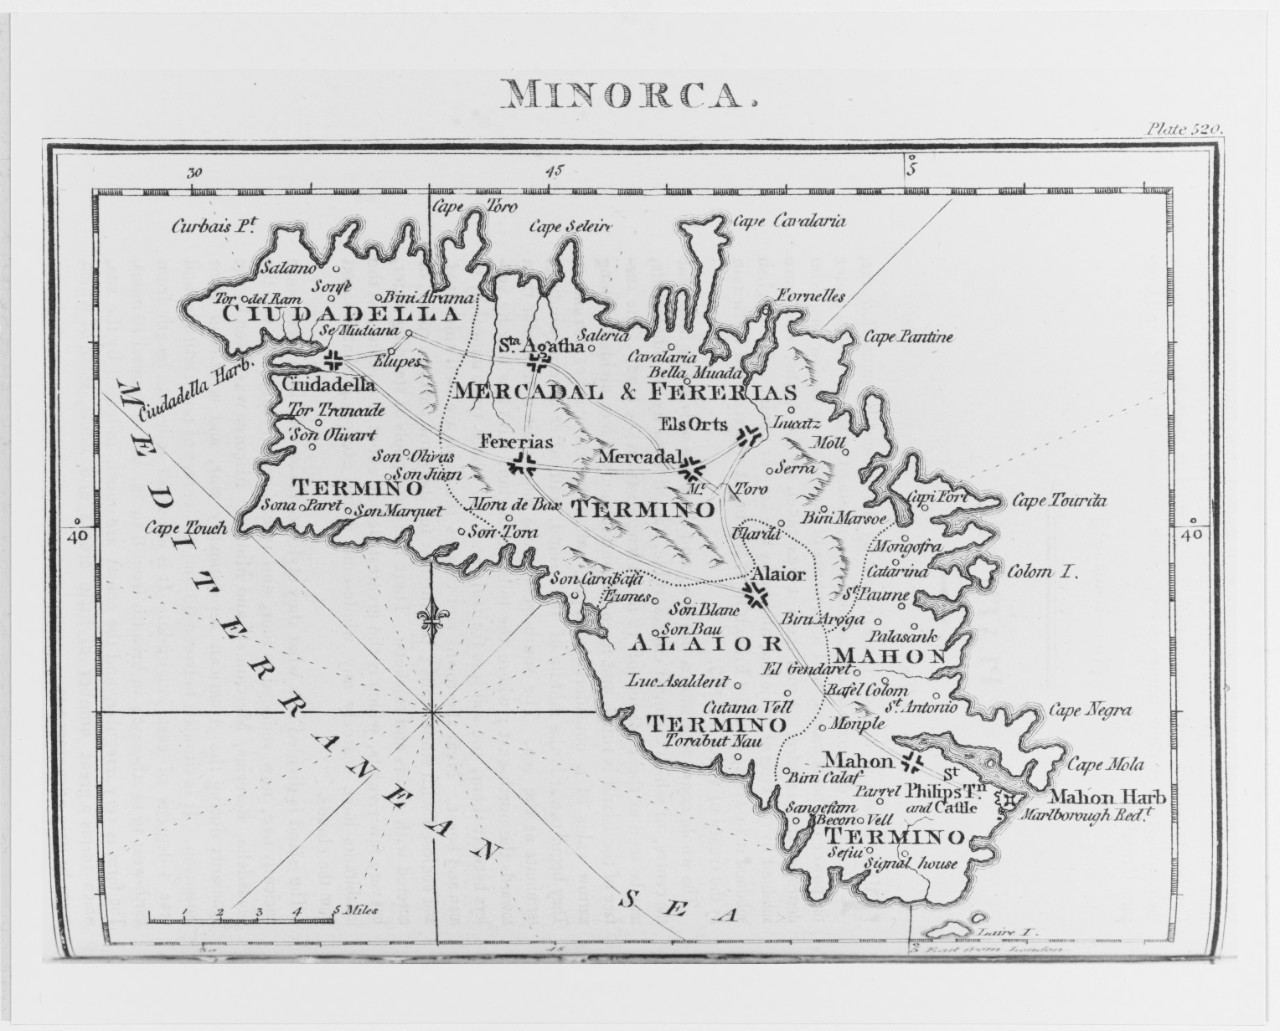 Minorca, Balearic Islands Map published in the Naval Chronicle, London, 1818